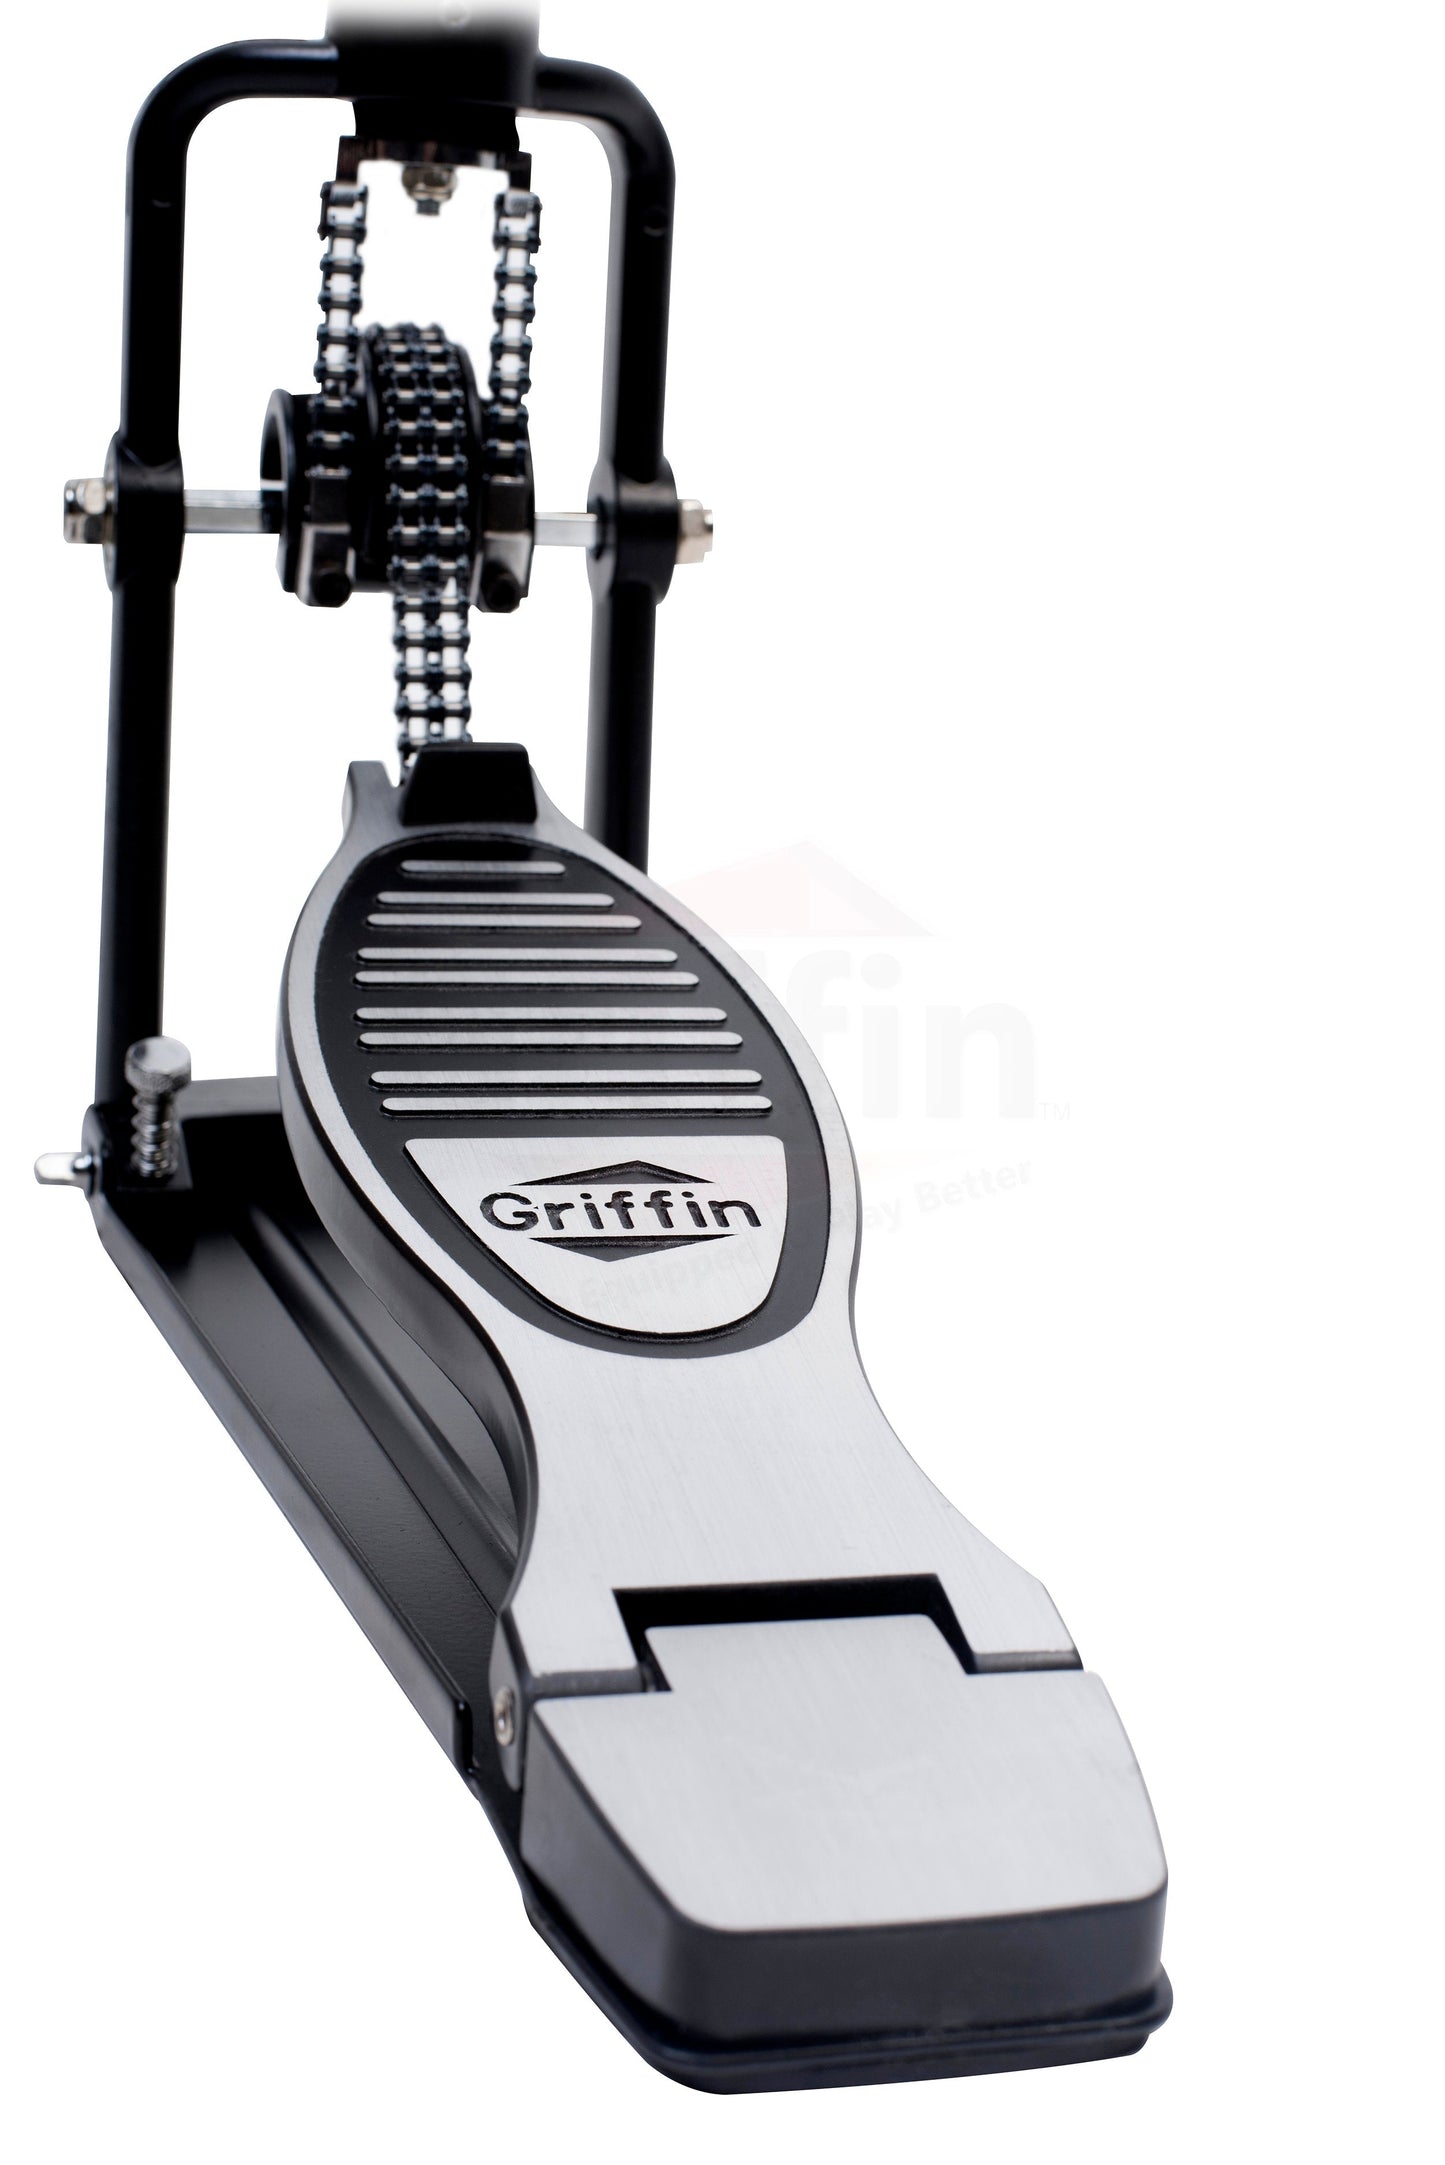 Remote Hi Hat Stand with Foot Pedal by GRIFFIN - Drummers Cable Auxiliary Cymbal High Hat Percussion Hardware with Drum Key - Heavy Duty Sturdy HiHat